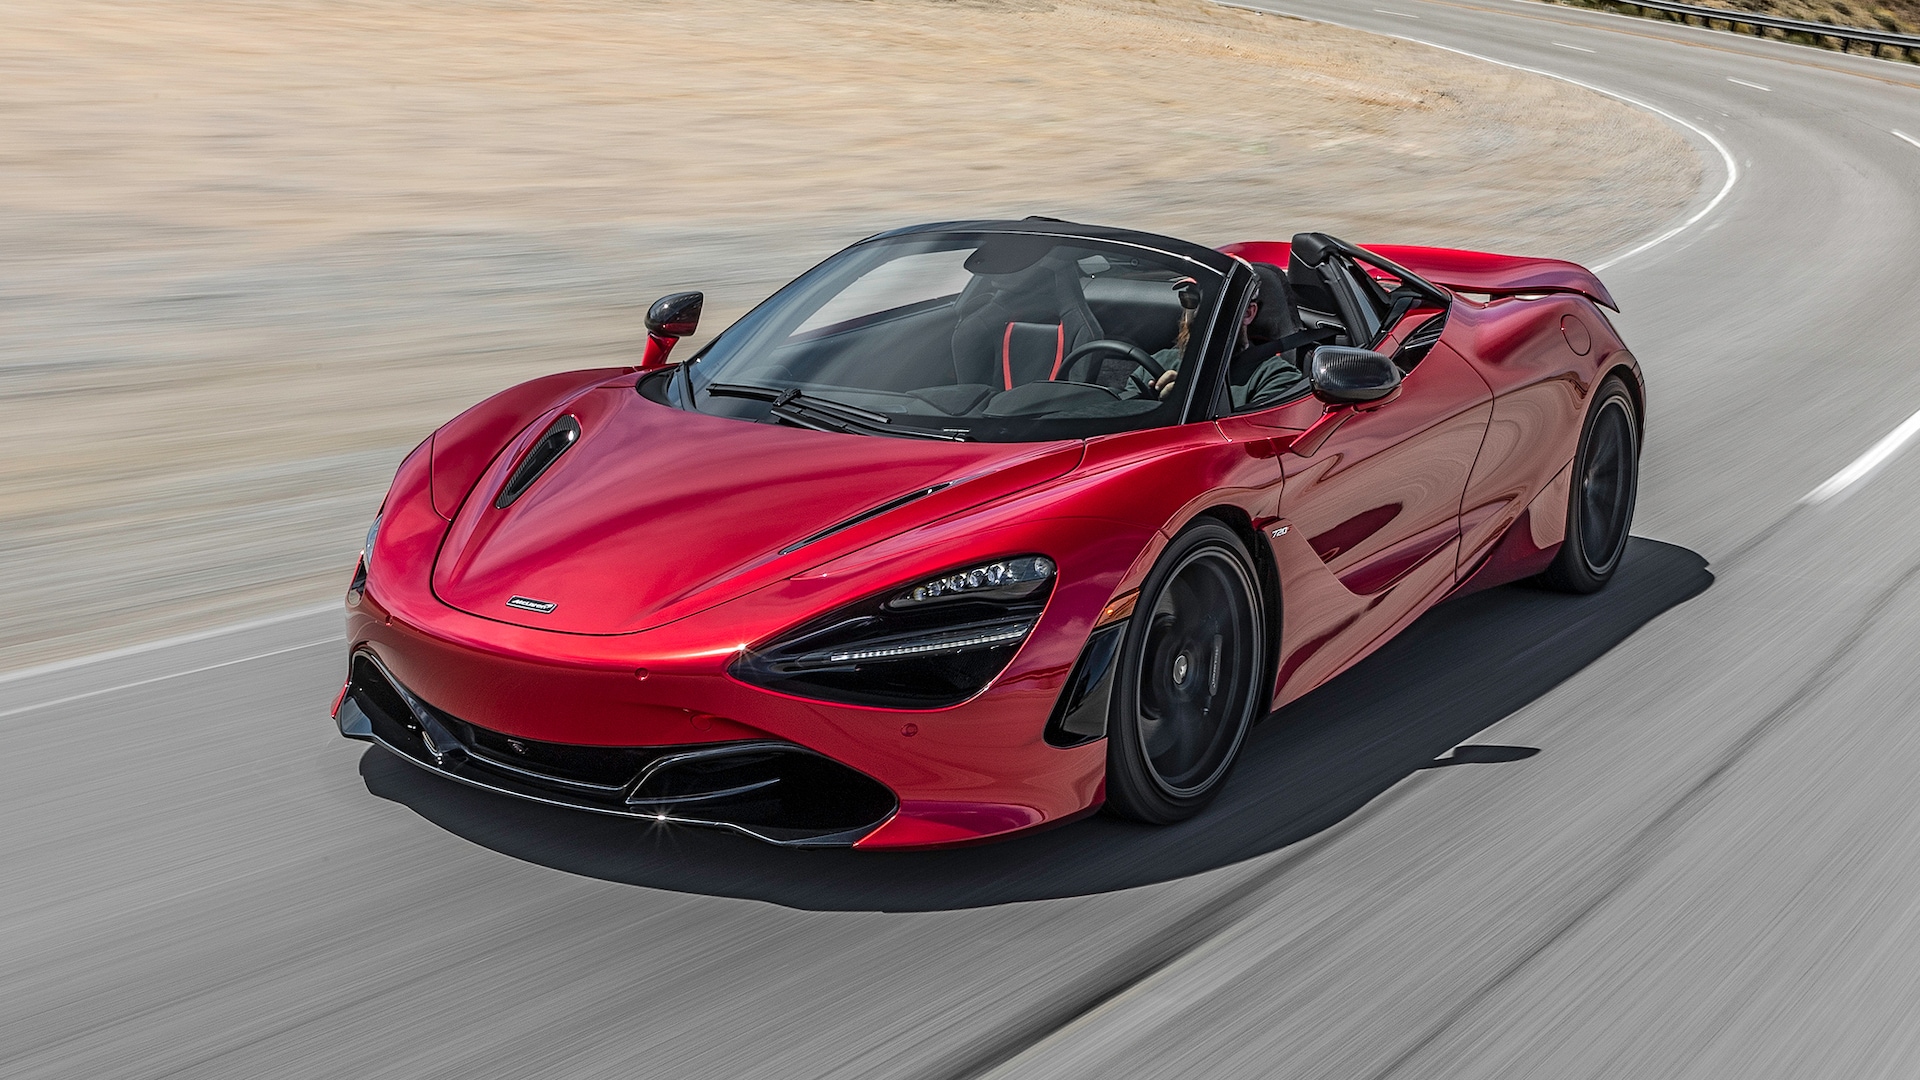 2020 McLaren 720S Prices, Reviews, and Photos - MotorTrend